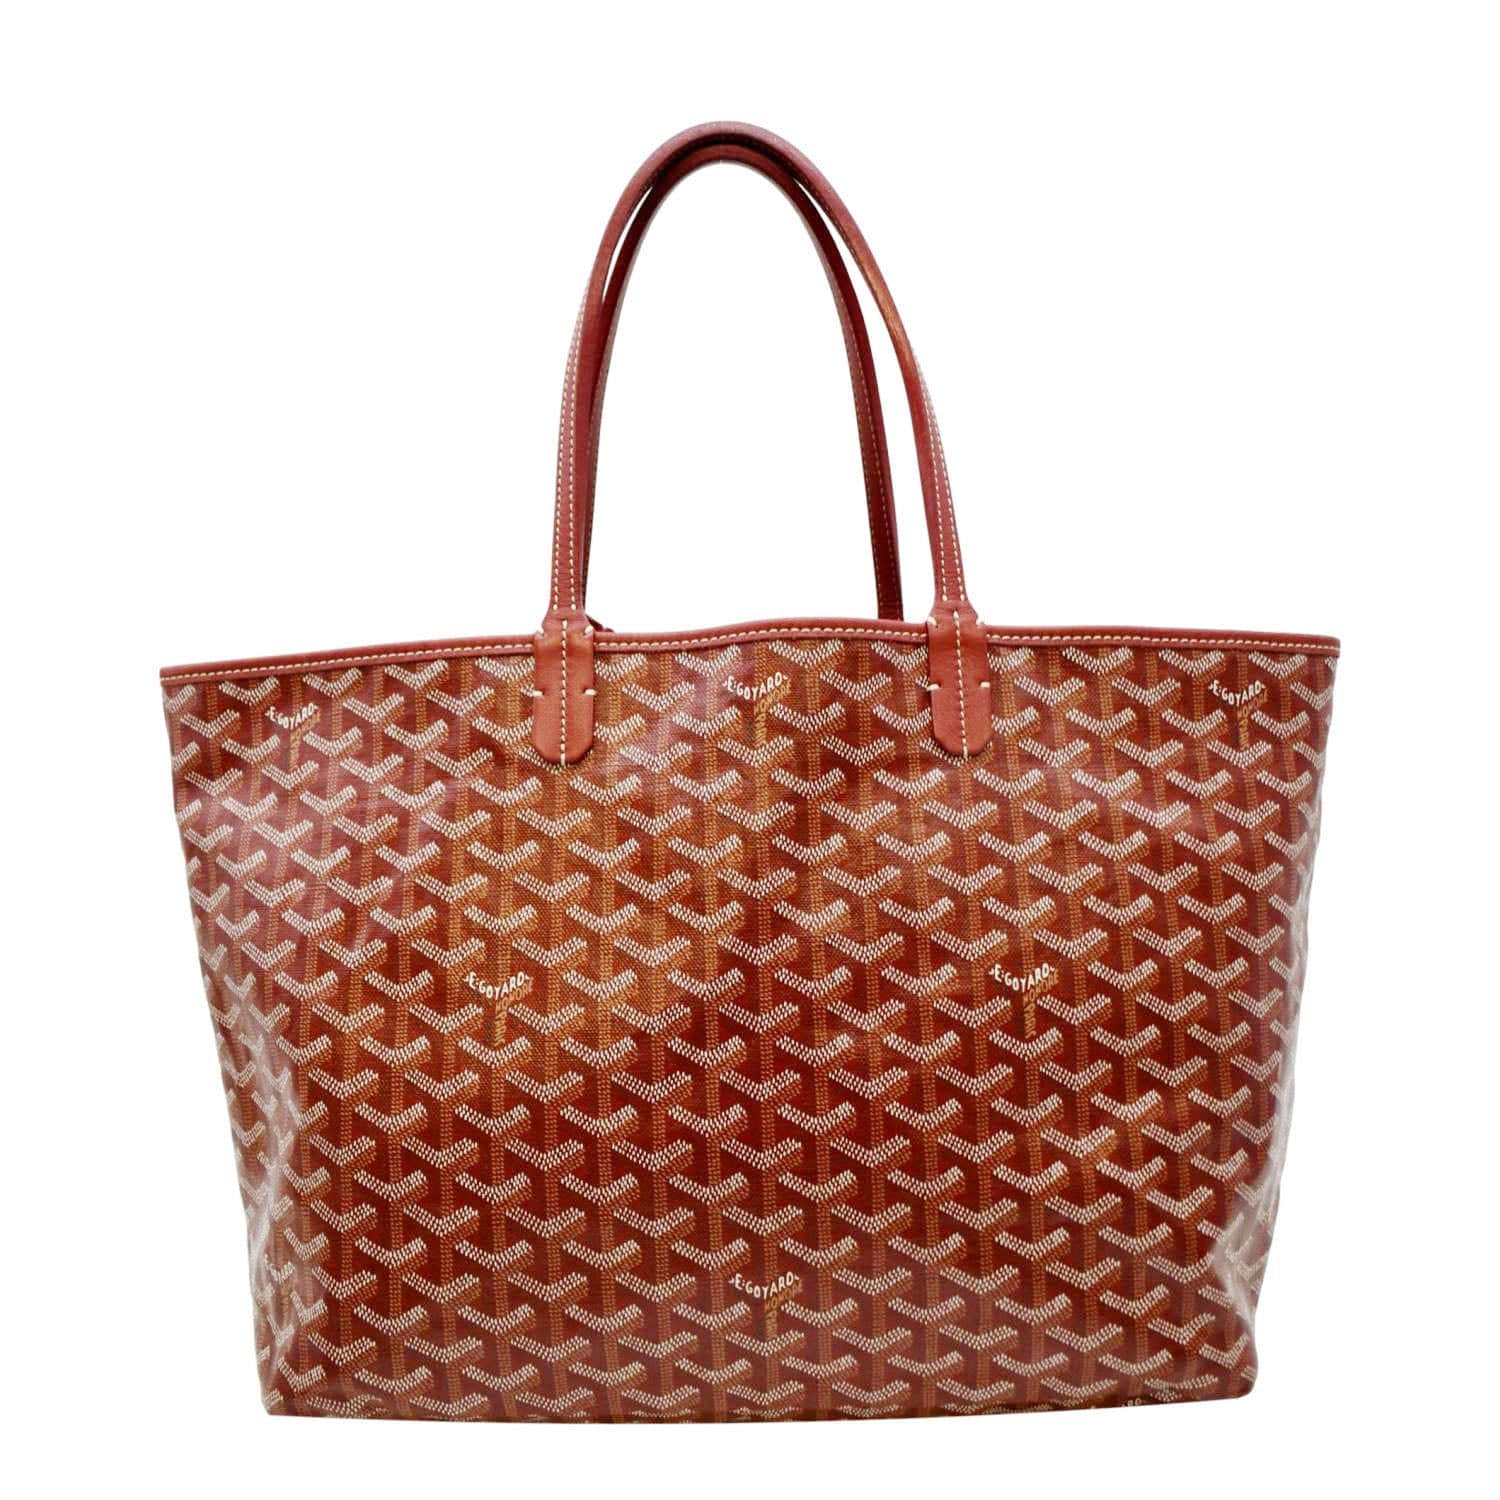 Are Goyard bags still popular? - Questions & Answers